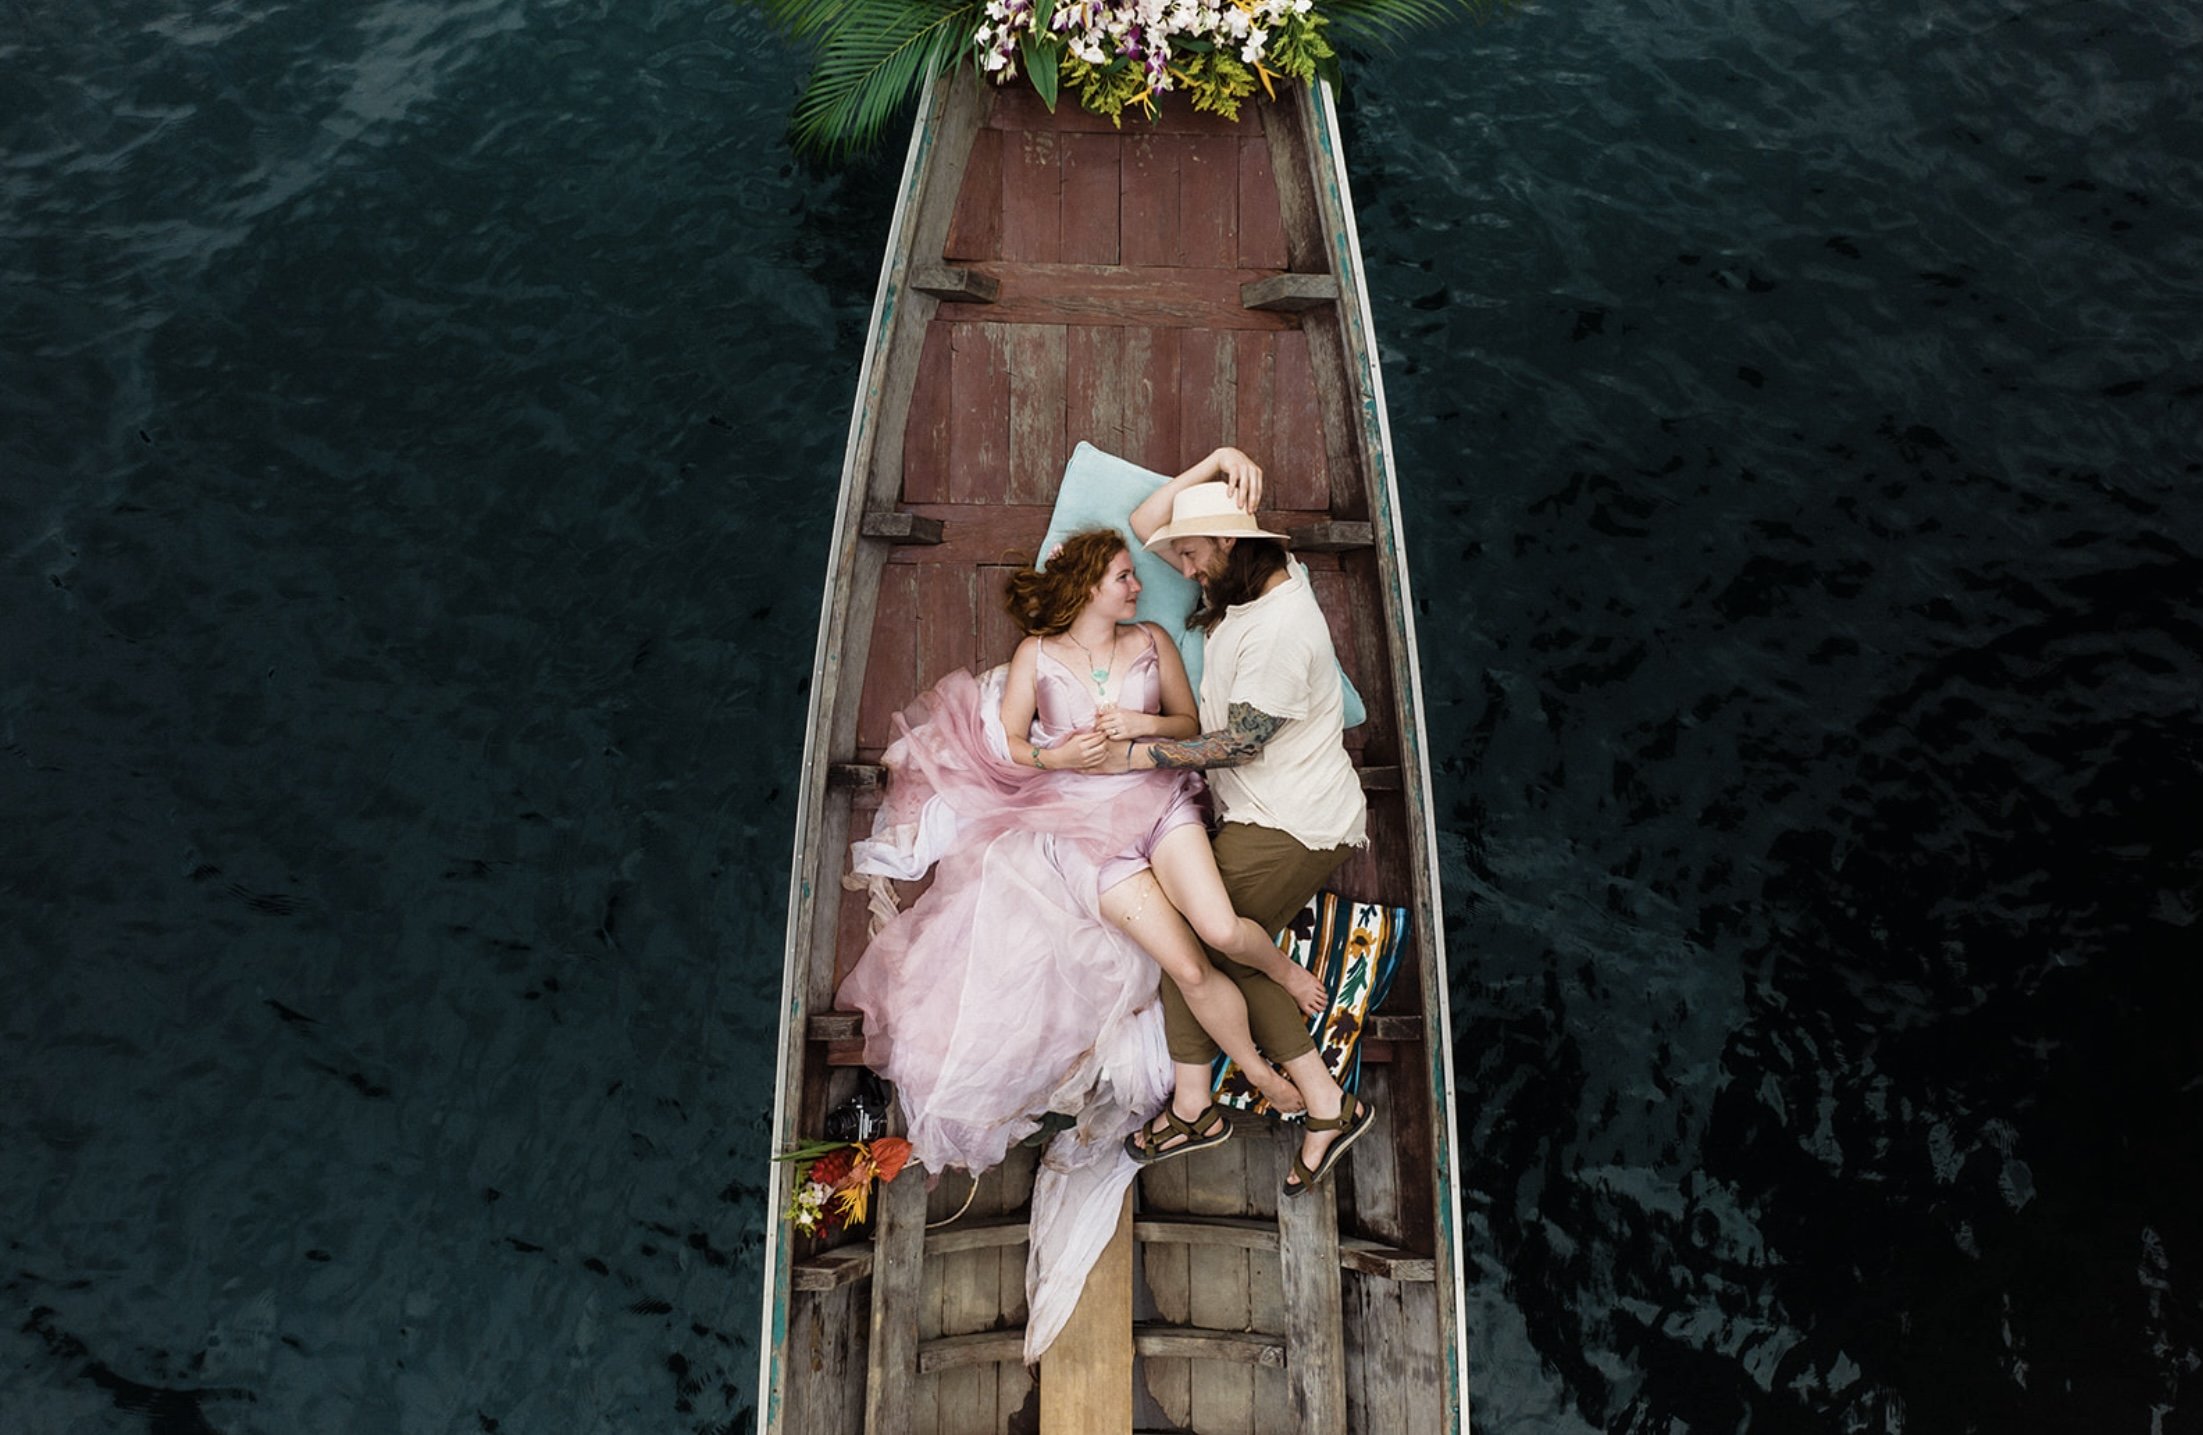  Custom wedding dress. Bride Meg’s elopement in Thailand. Photo by  The Foxes Photography .  